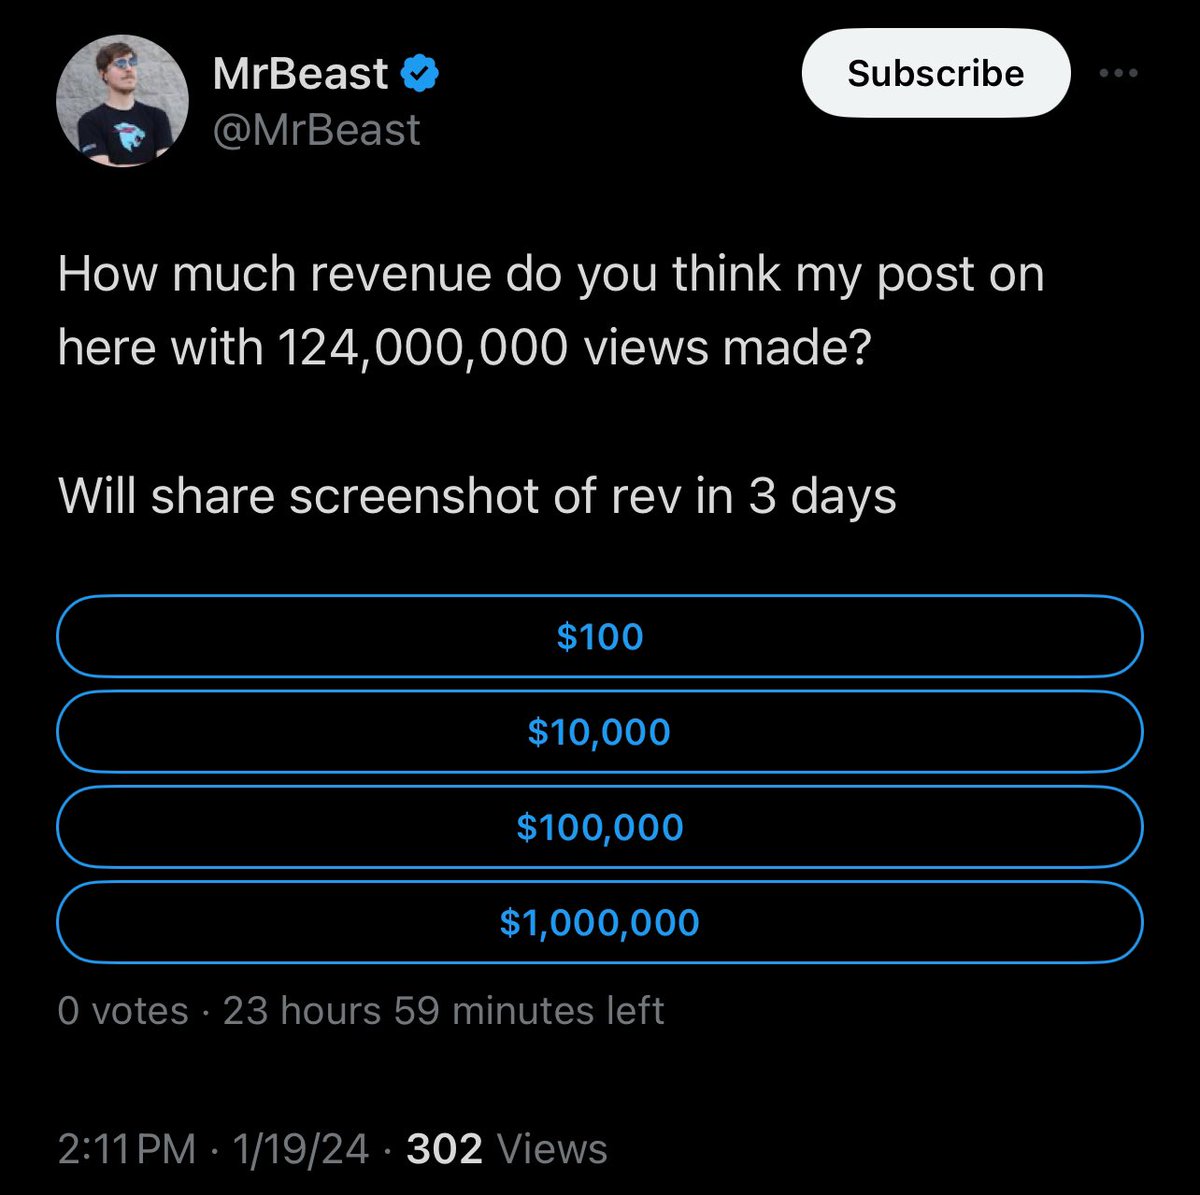 It is becoming clear to me that MrBeast has worked out some sort of deal with Elon here and is not being truthful about it, much like how he is with all his videos